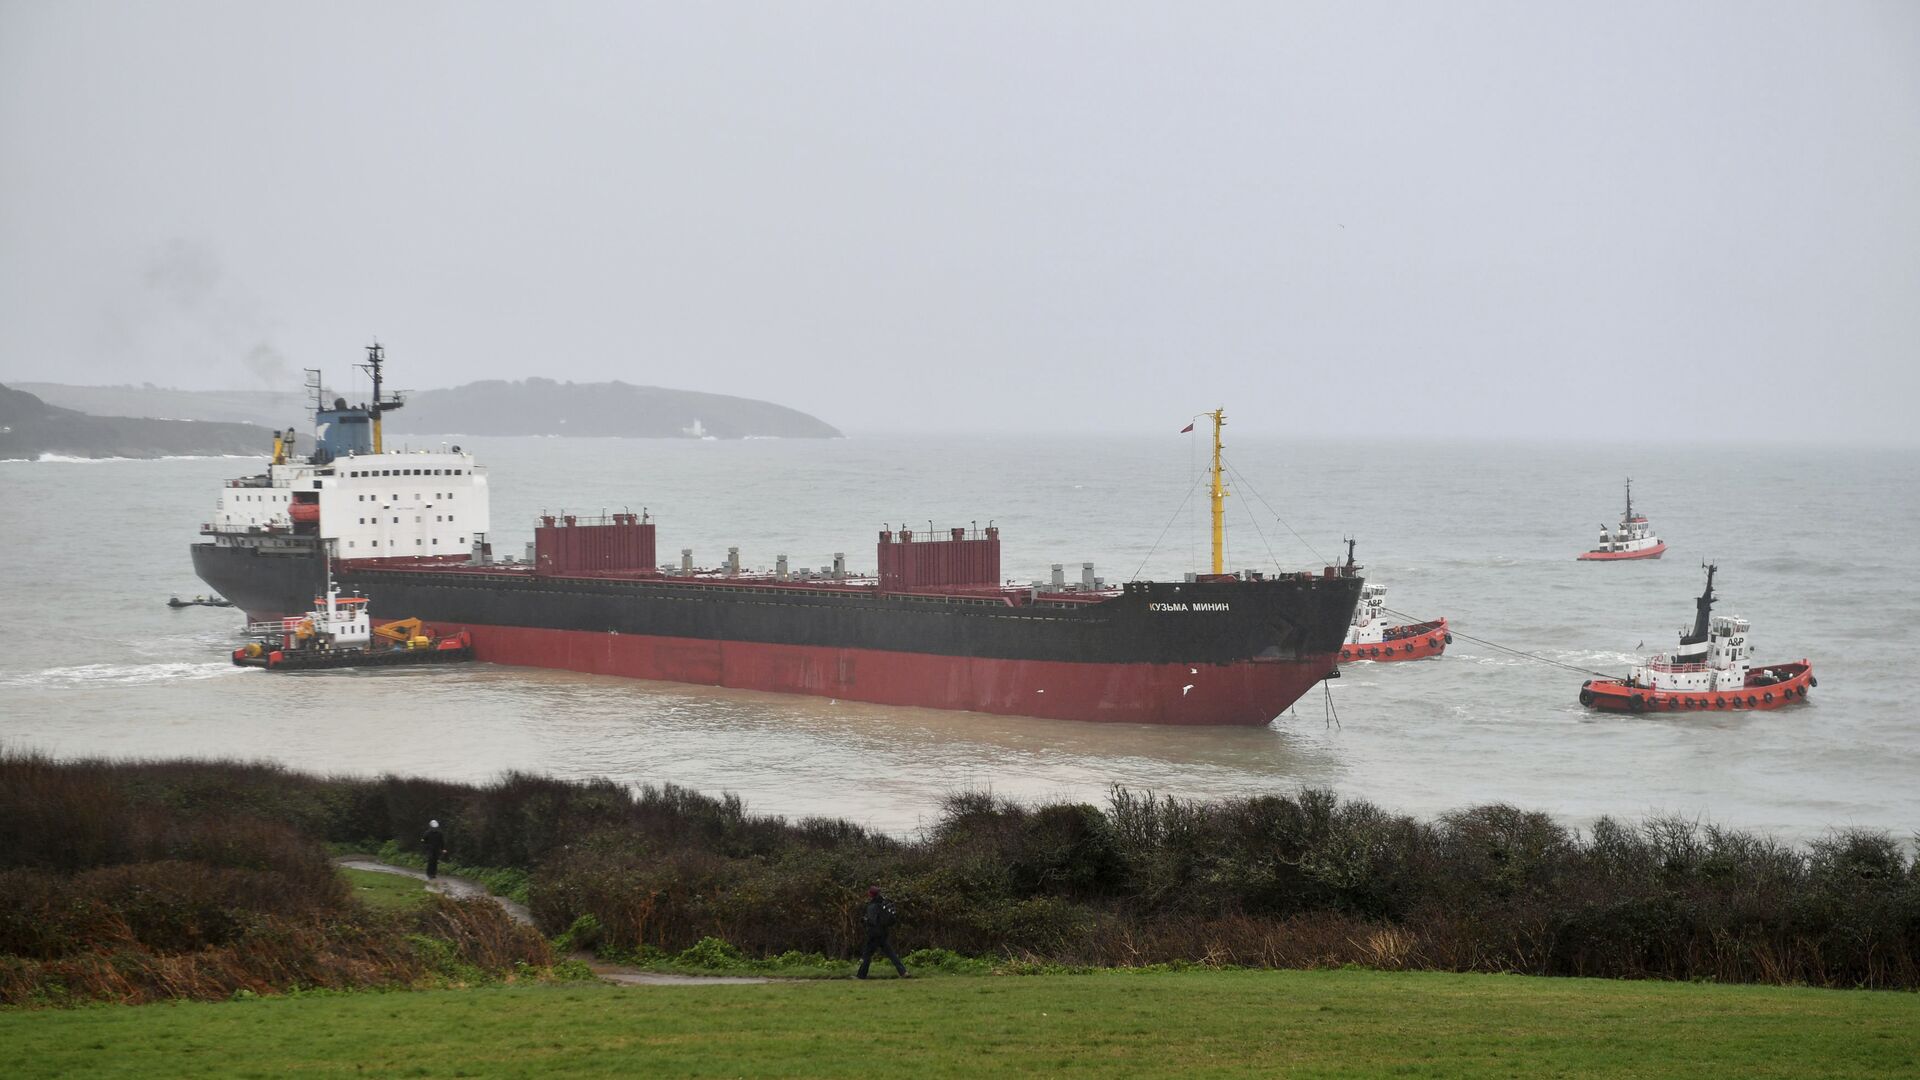 Tugs manoeuvre the Kuzma Minin, a 16,000-tonne Russian cargo ship, as attempts are made to refloat it after it ran aground off Gyllyngvase Beach in Falmouth, south west England, Tuesday Dec. 18, 2018 - Sputnik International, 1920, 29.03.2022